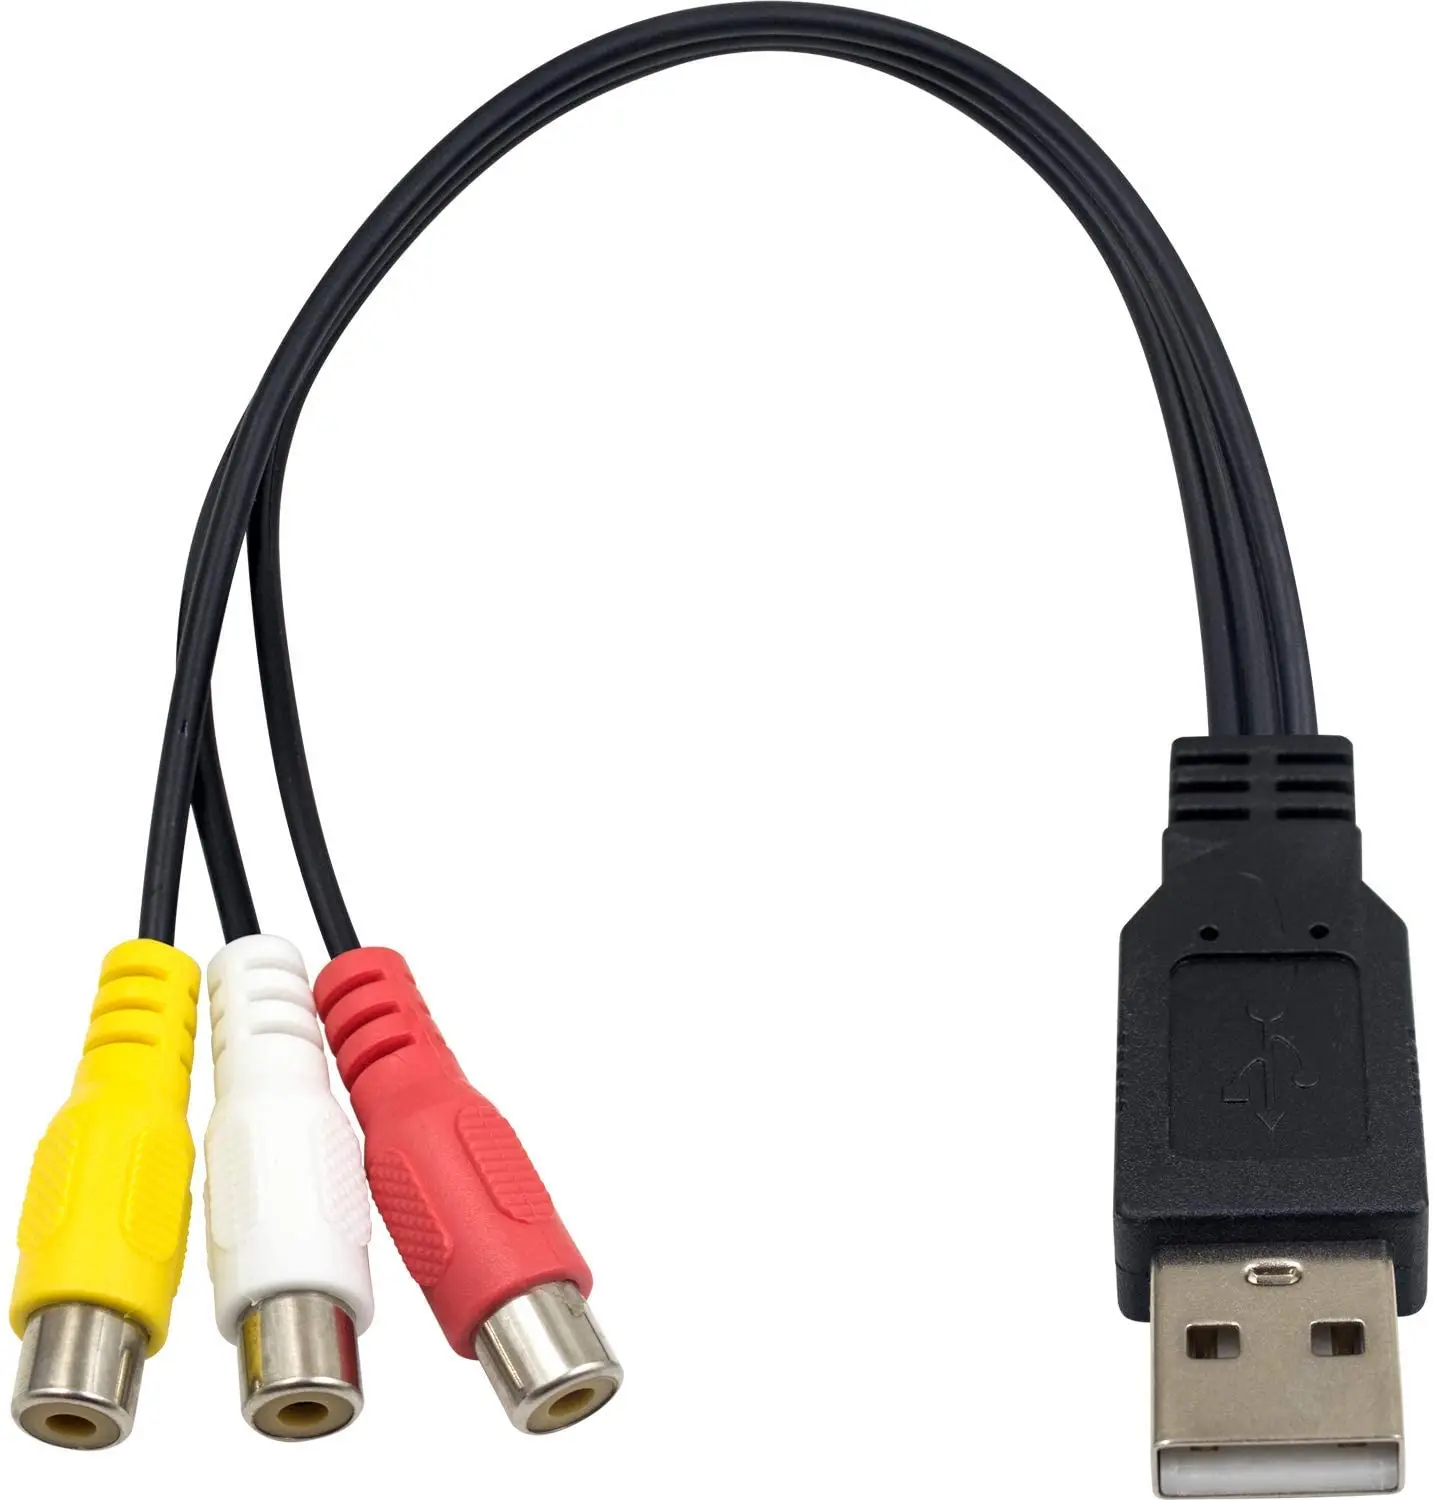 Wholesale 2021 CABLETOLINK Factory USB 2.0 A 3 RCA Female Jack Splitter Audio AV Composite Adapter Cord Cable From m.alibaba.com